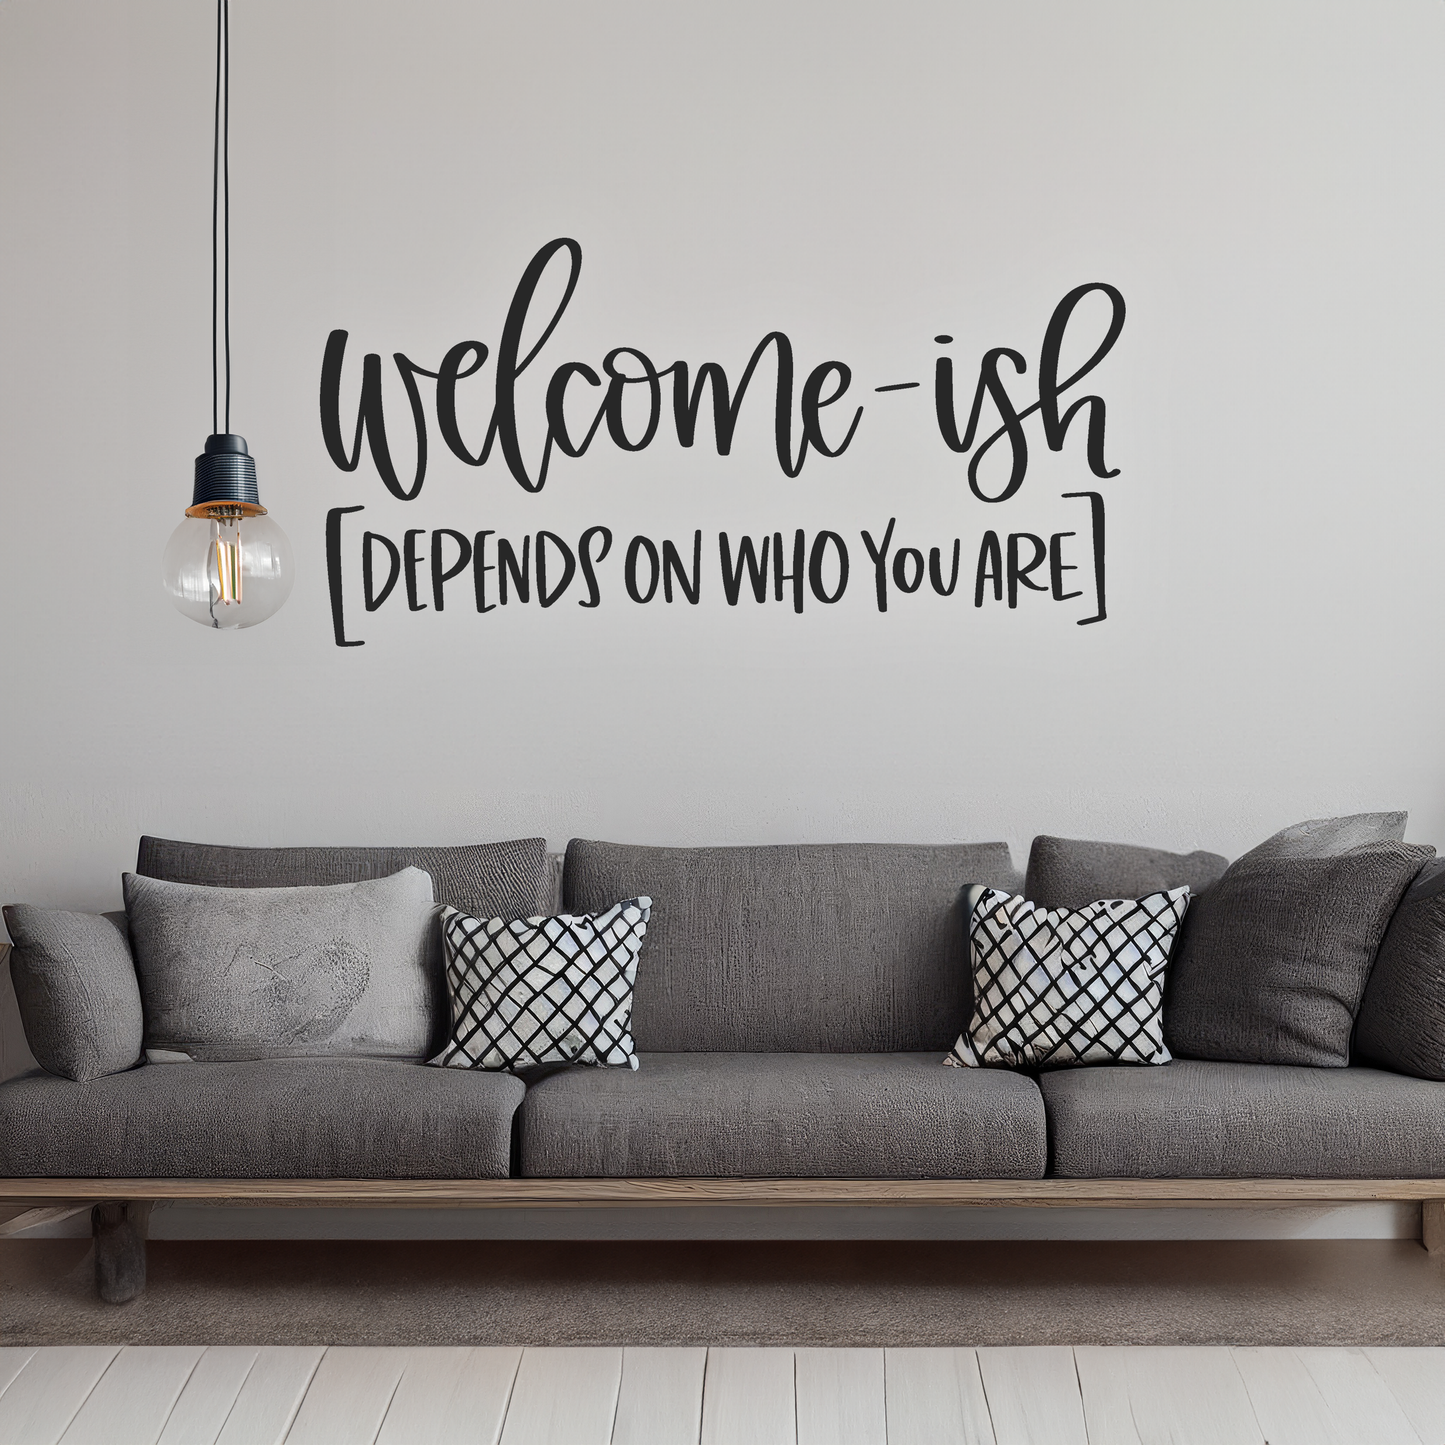 Welcome-Ish Wall Sticker Decal